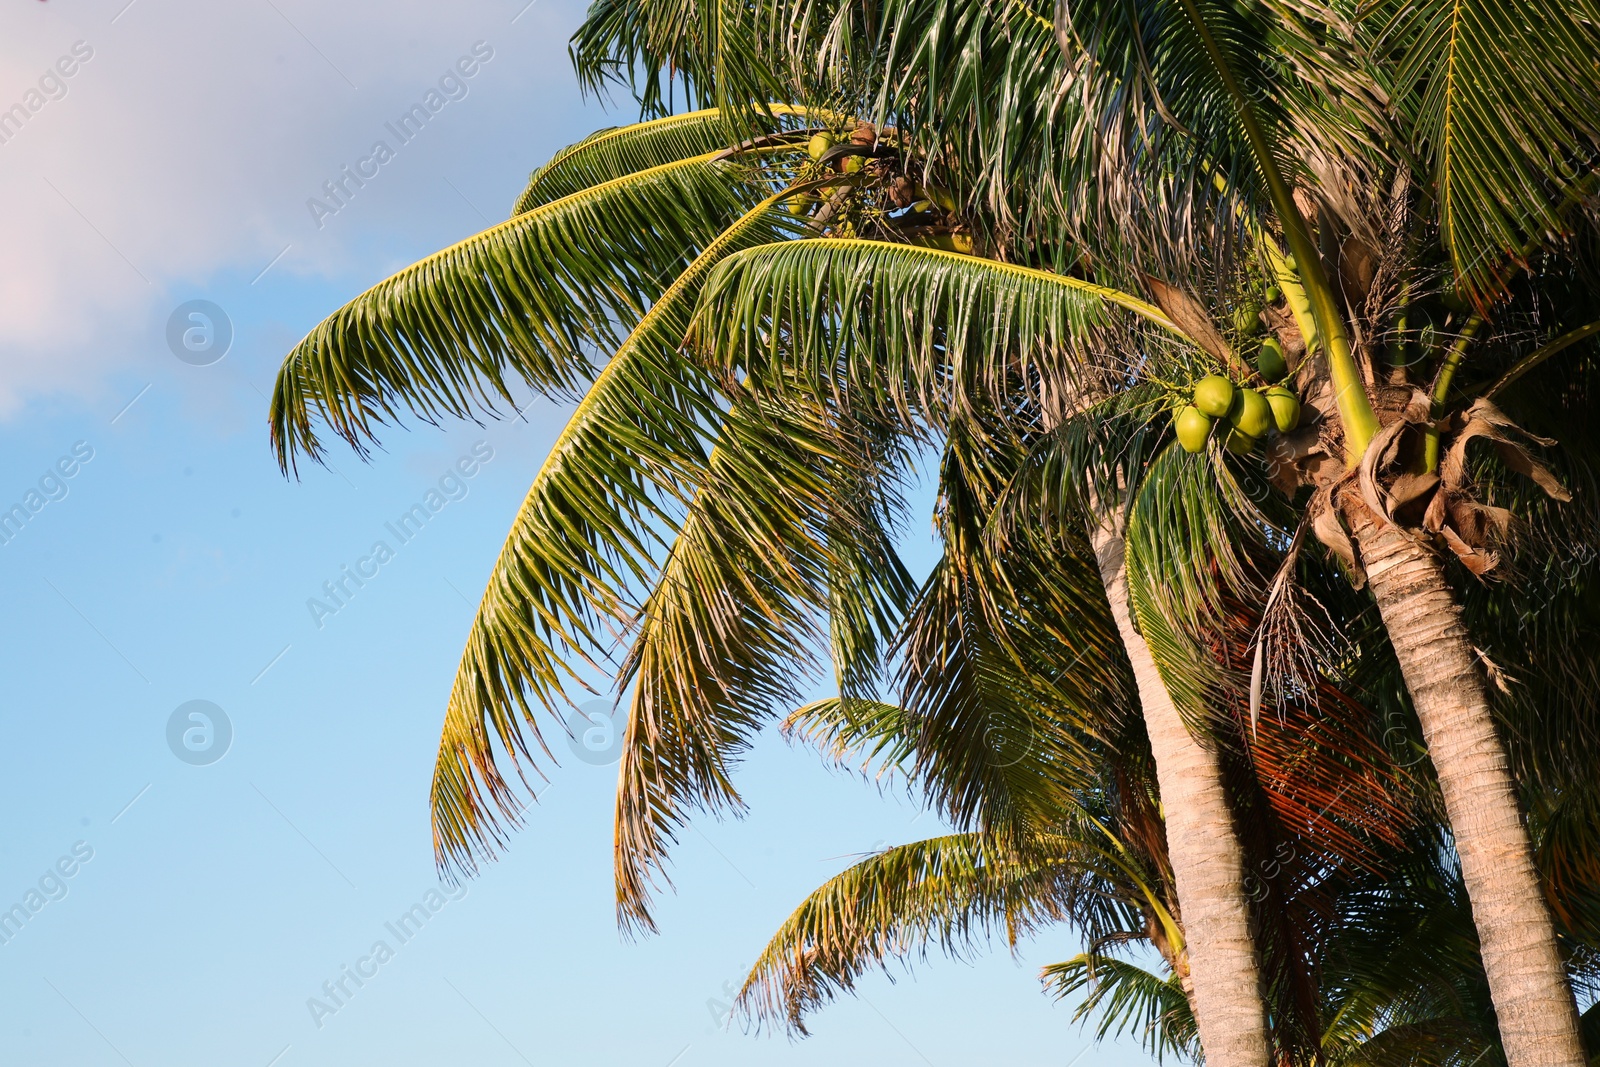 Photo of Beautiful palm trees with green leaves under clear blue sky, low angle view